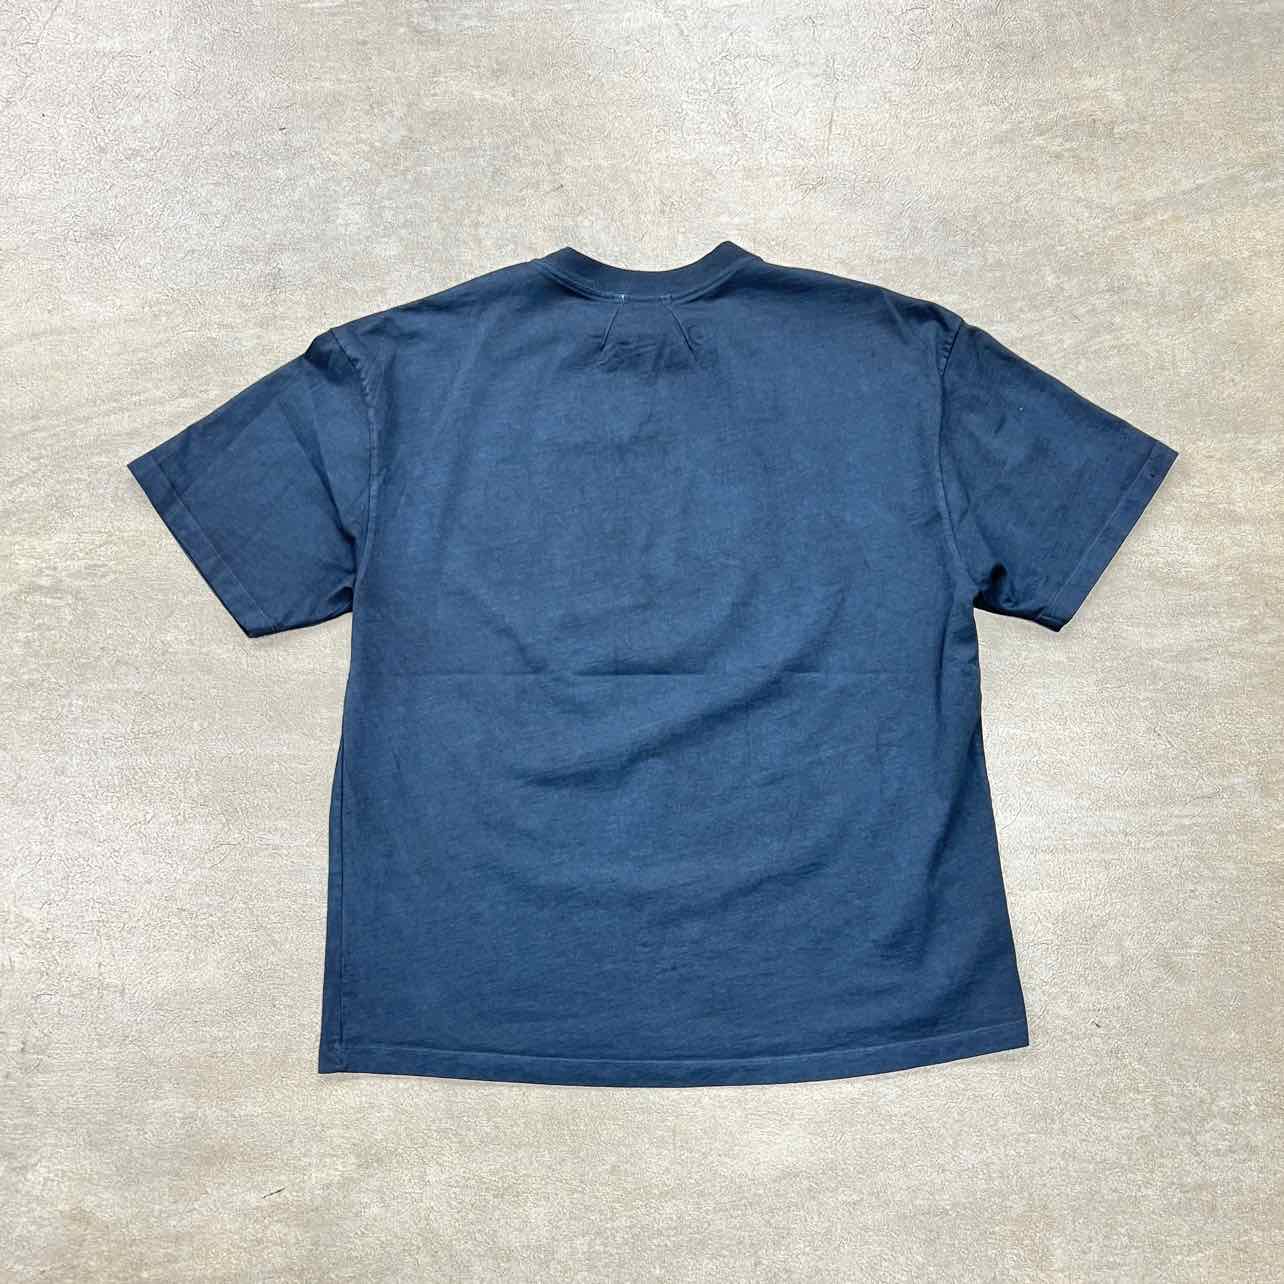 Rhude T-Shirt &quot;LEOPARD&quot; Navy Used Size XL